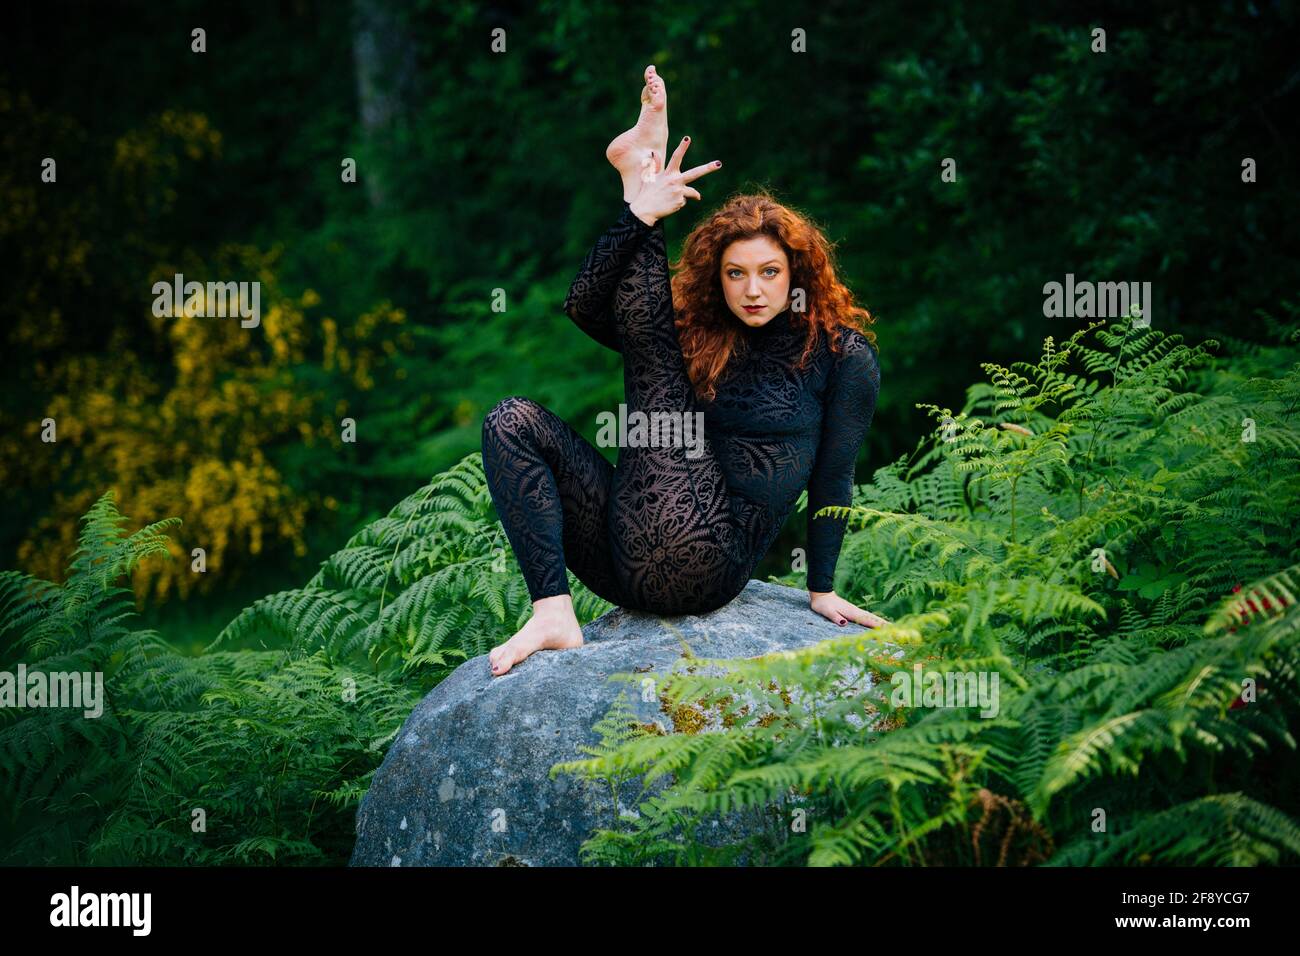 Redhead woman doing yoga on stone in forest Stock Photo